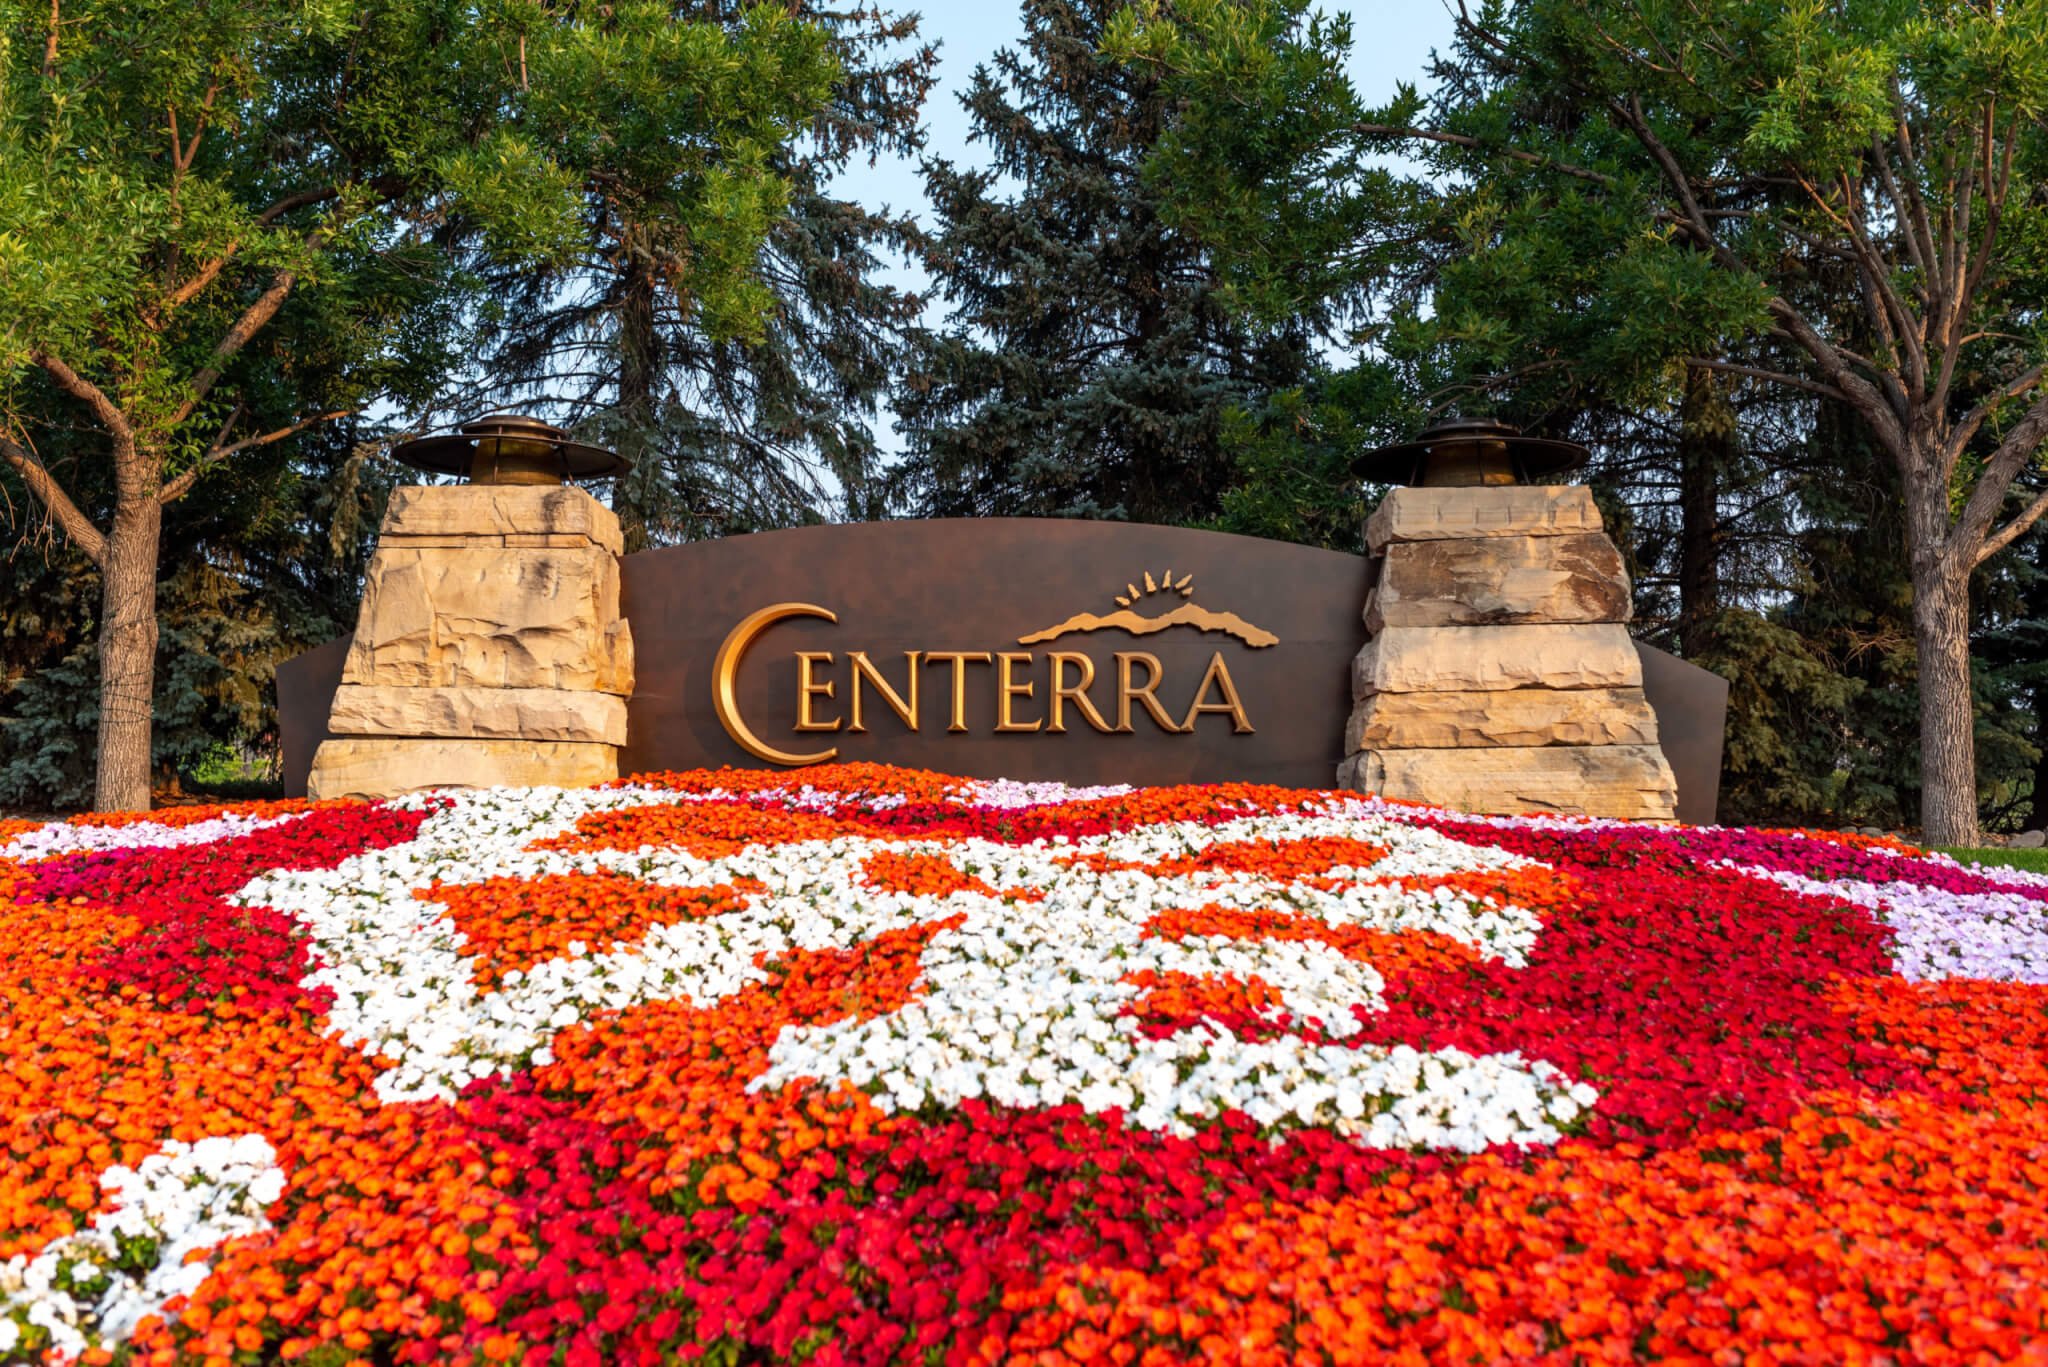 Multicolour flower bed in front of centerra entrance